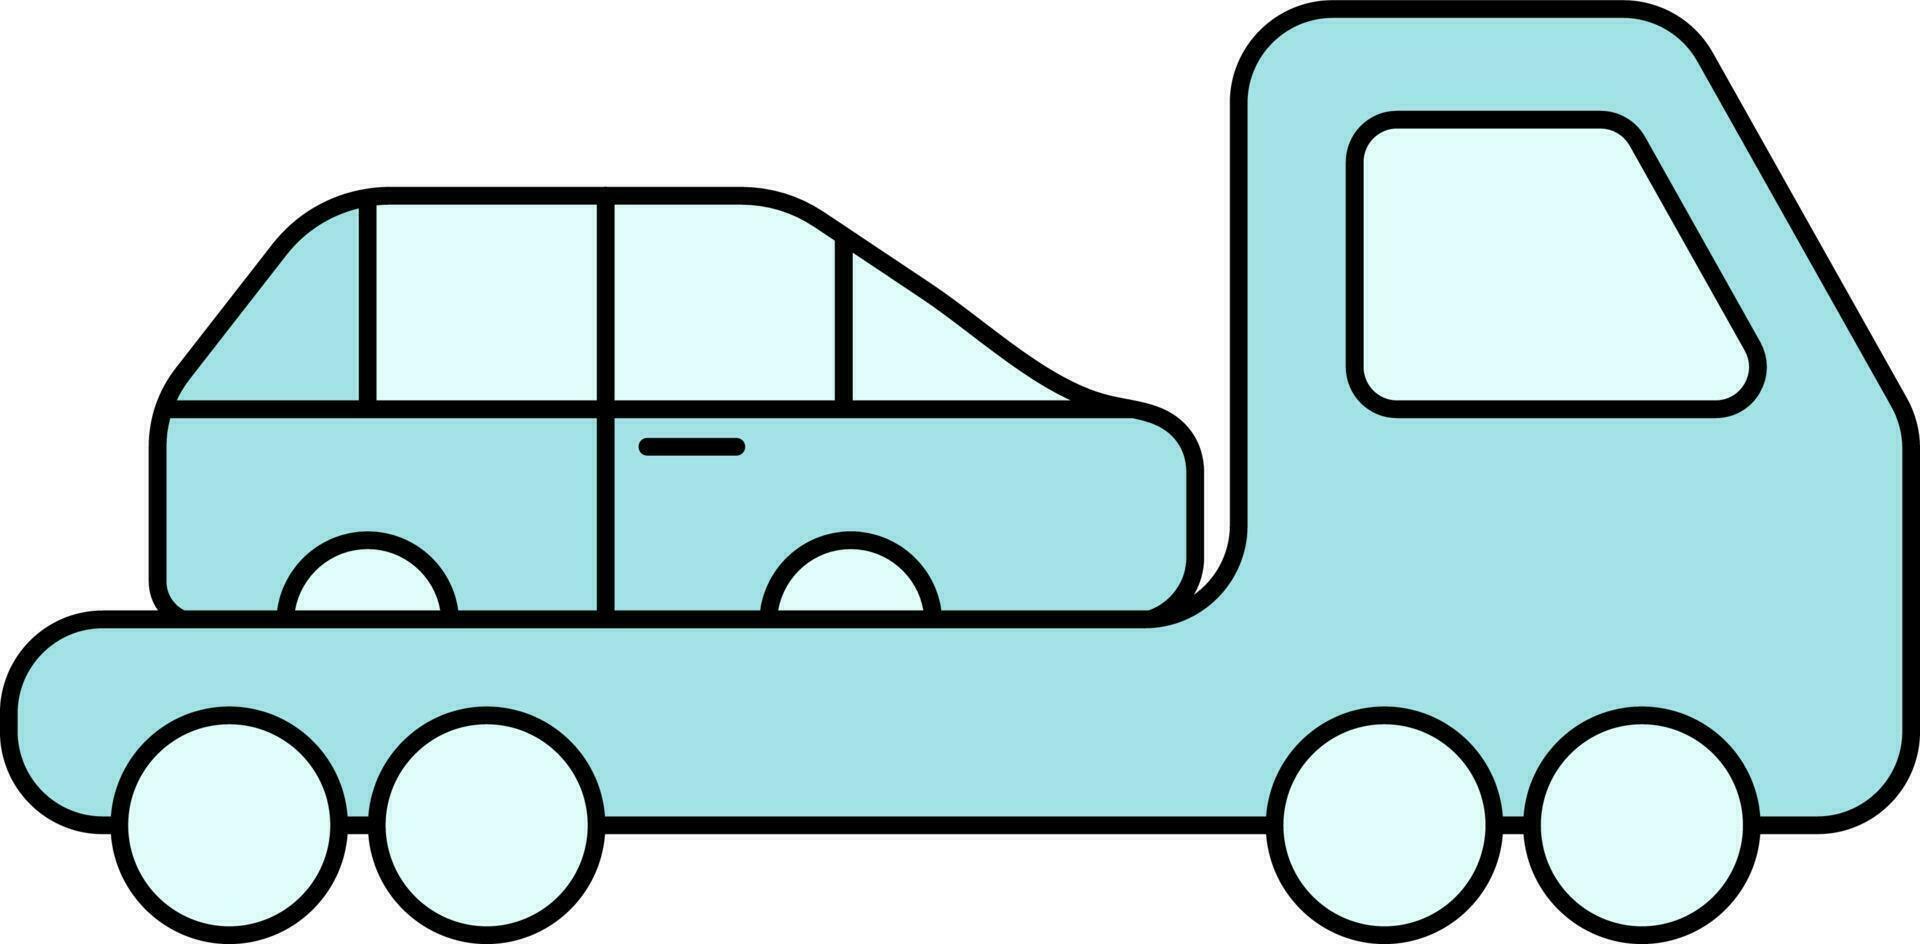 Illustration of Car on Tow Truck Icon in Turquoise Color. vector